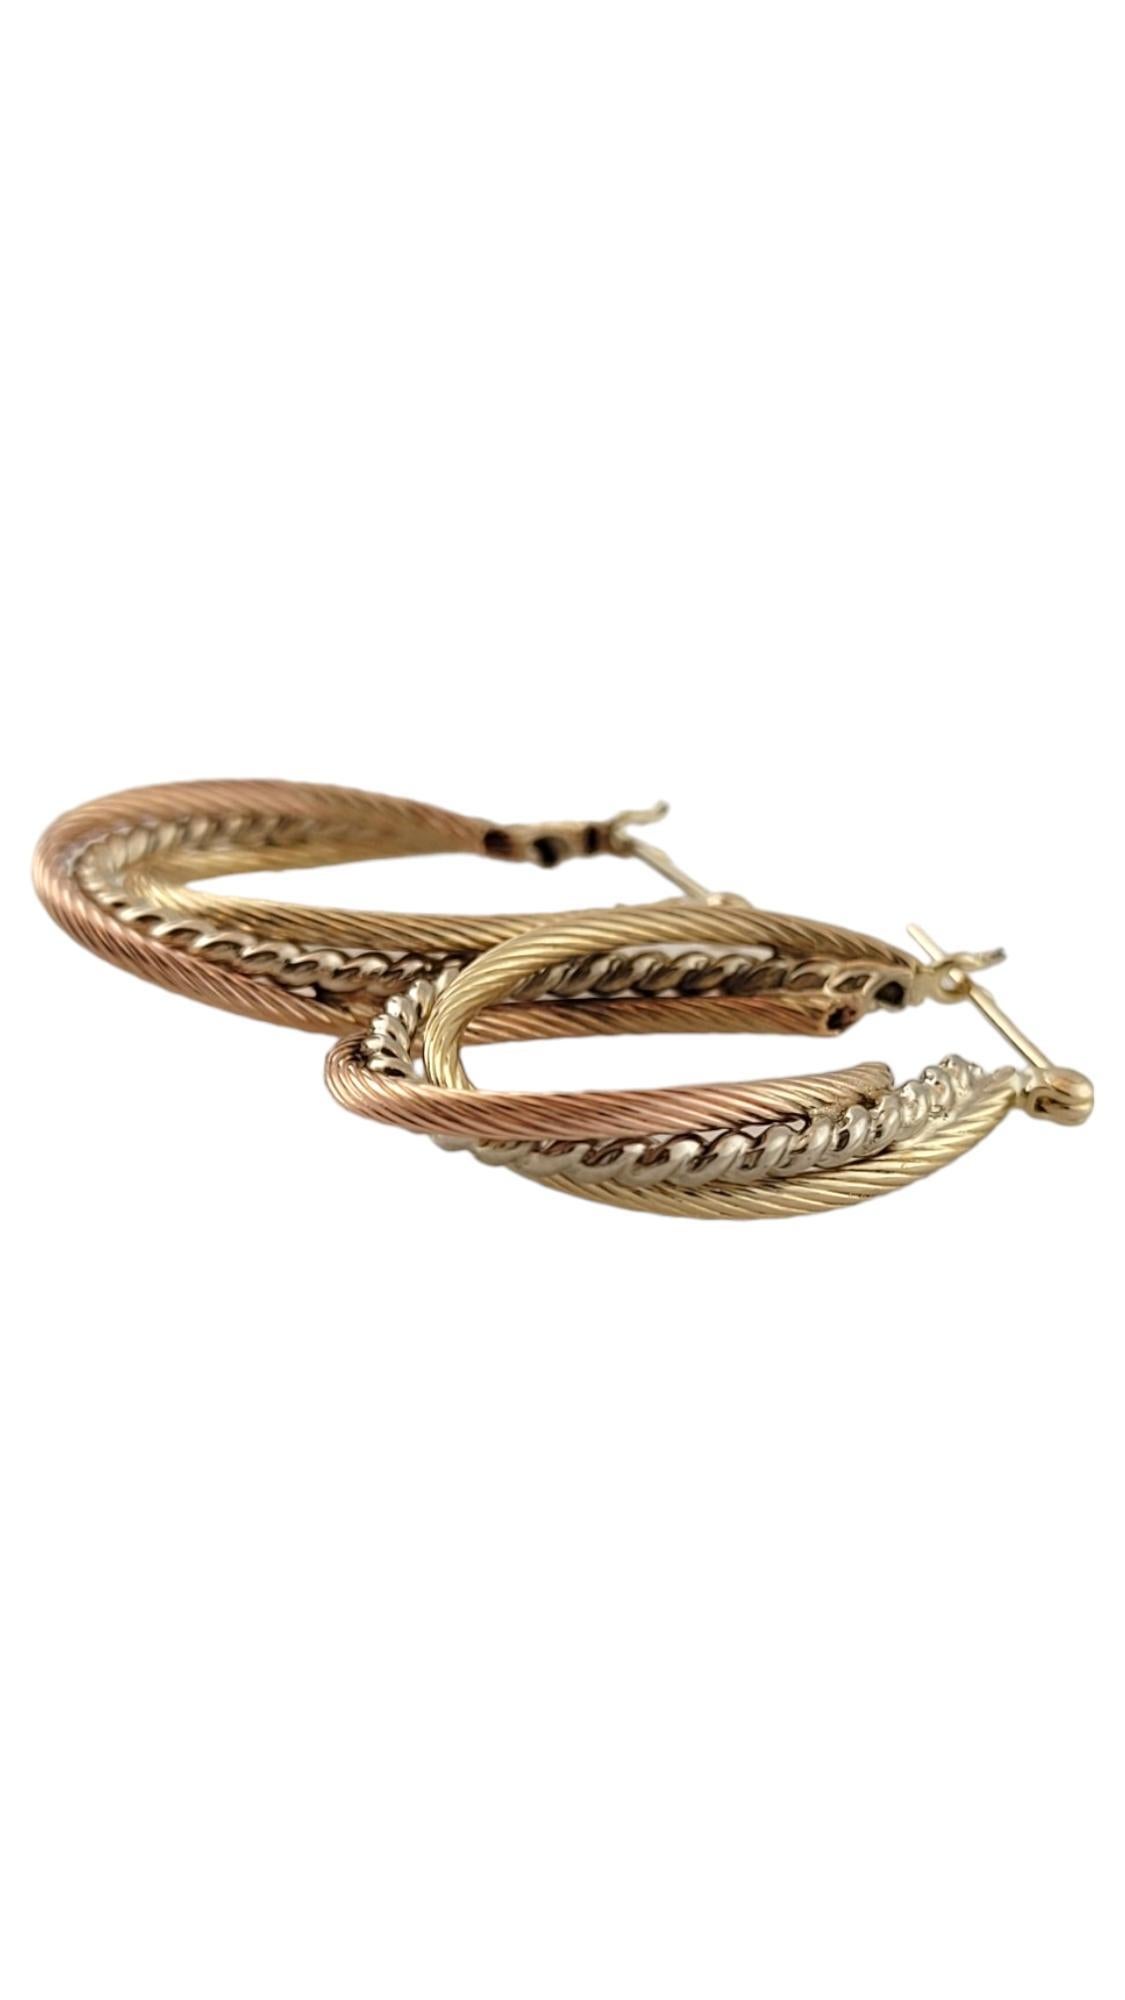 Vintage 14K Yellow, White and Rose Gold Tri-Colored Twisted Oval Hoops #16444

This beautiful set of 14K gold tri-colored oval hoops are in a gorgeous, twisted pattern that will look stunning on anyone!

Size: 28.9mm X 18.62mm X 5.18mm

Weight: 2.3